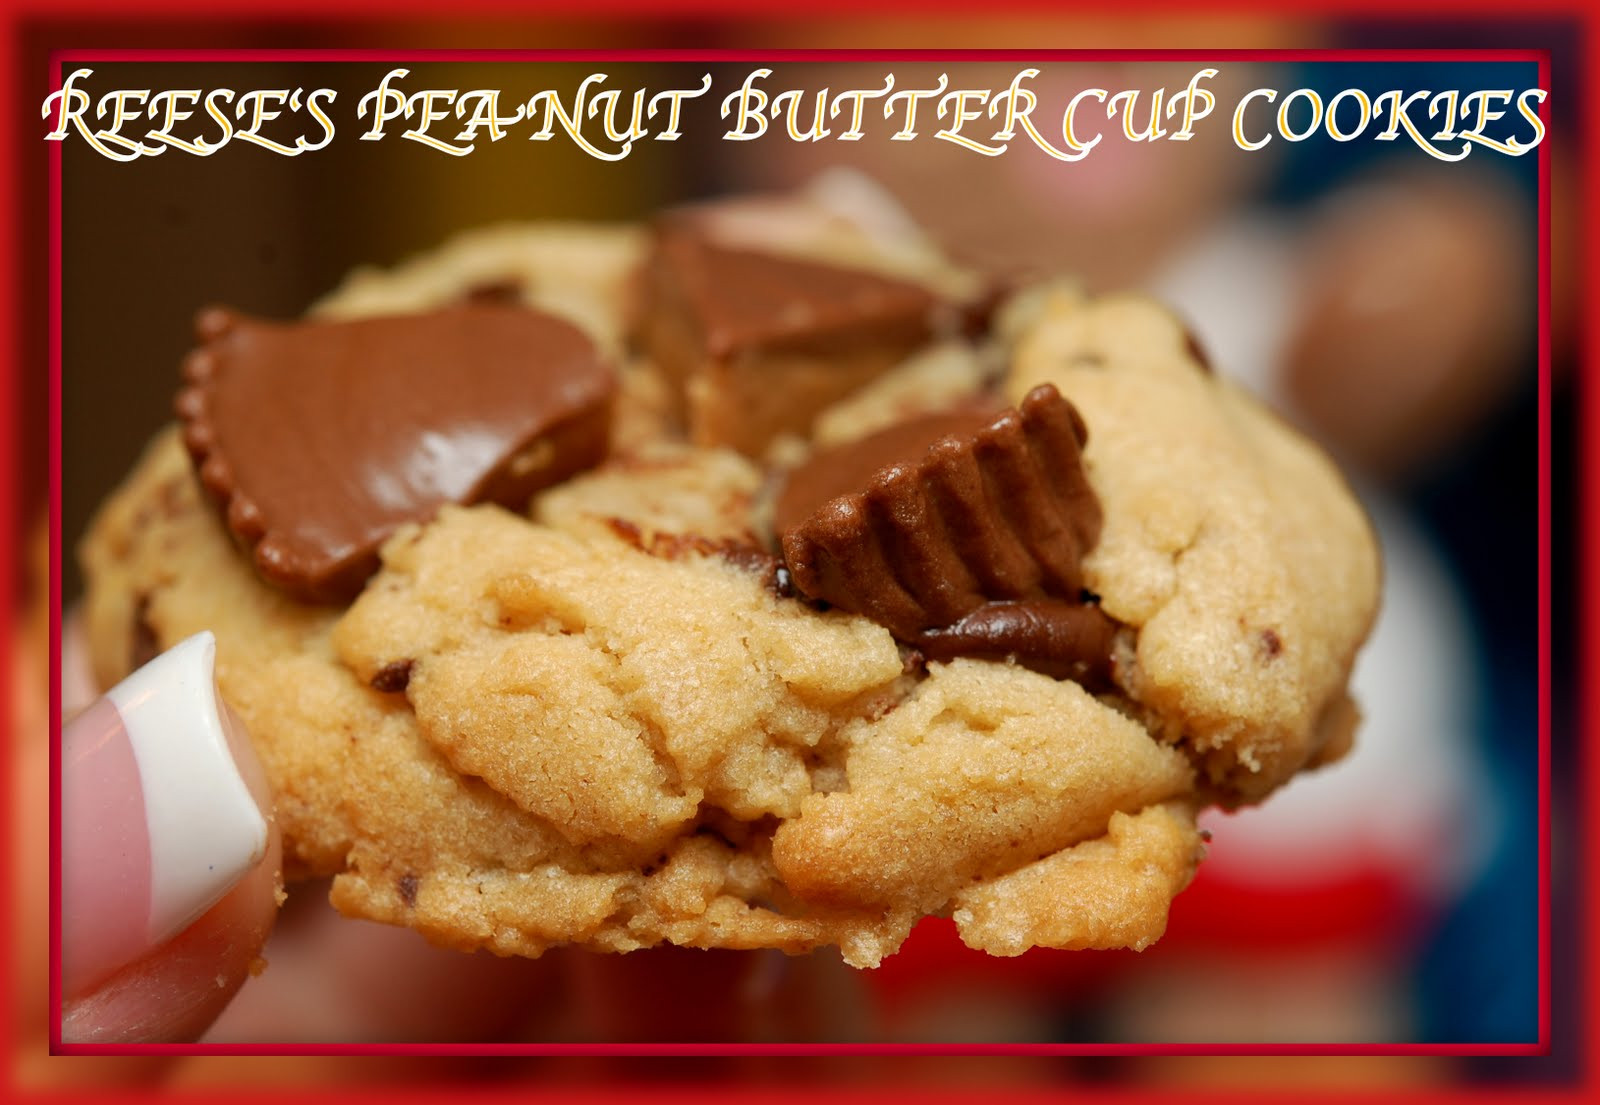 Reese Peanut Butter Cup Cookies
 OVER THE TOP REESE S PEANUT BUTTER CUP COOKIES Hugs and